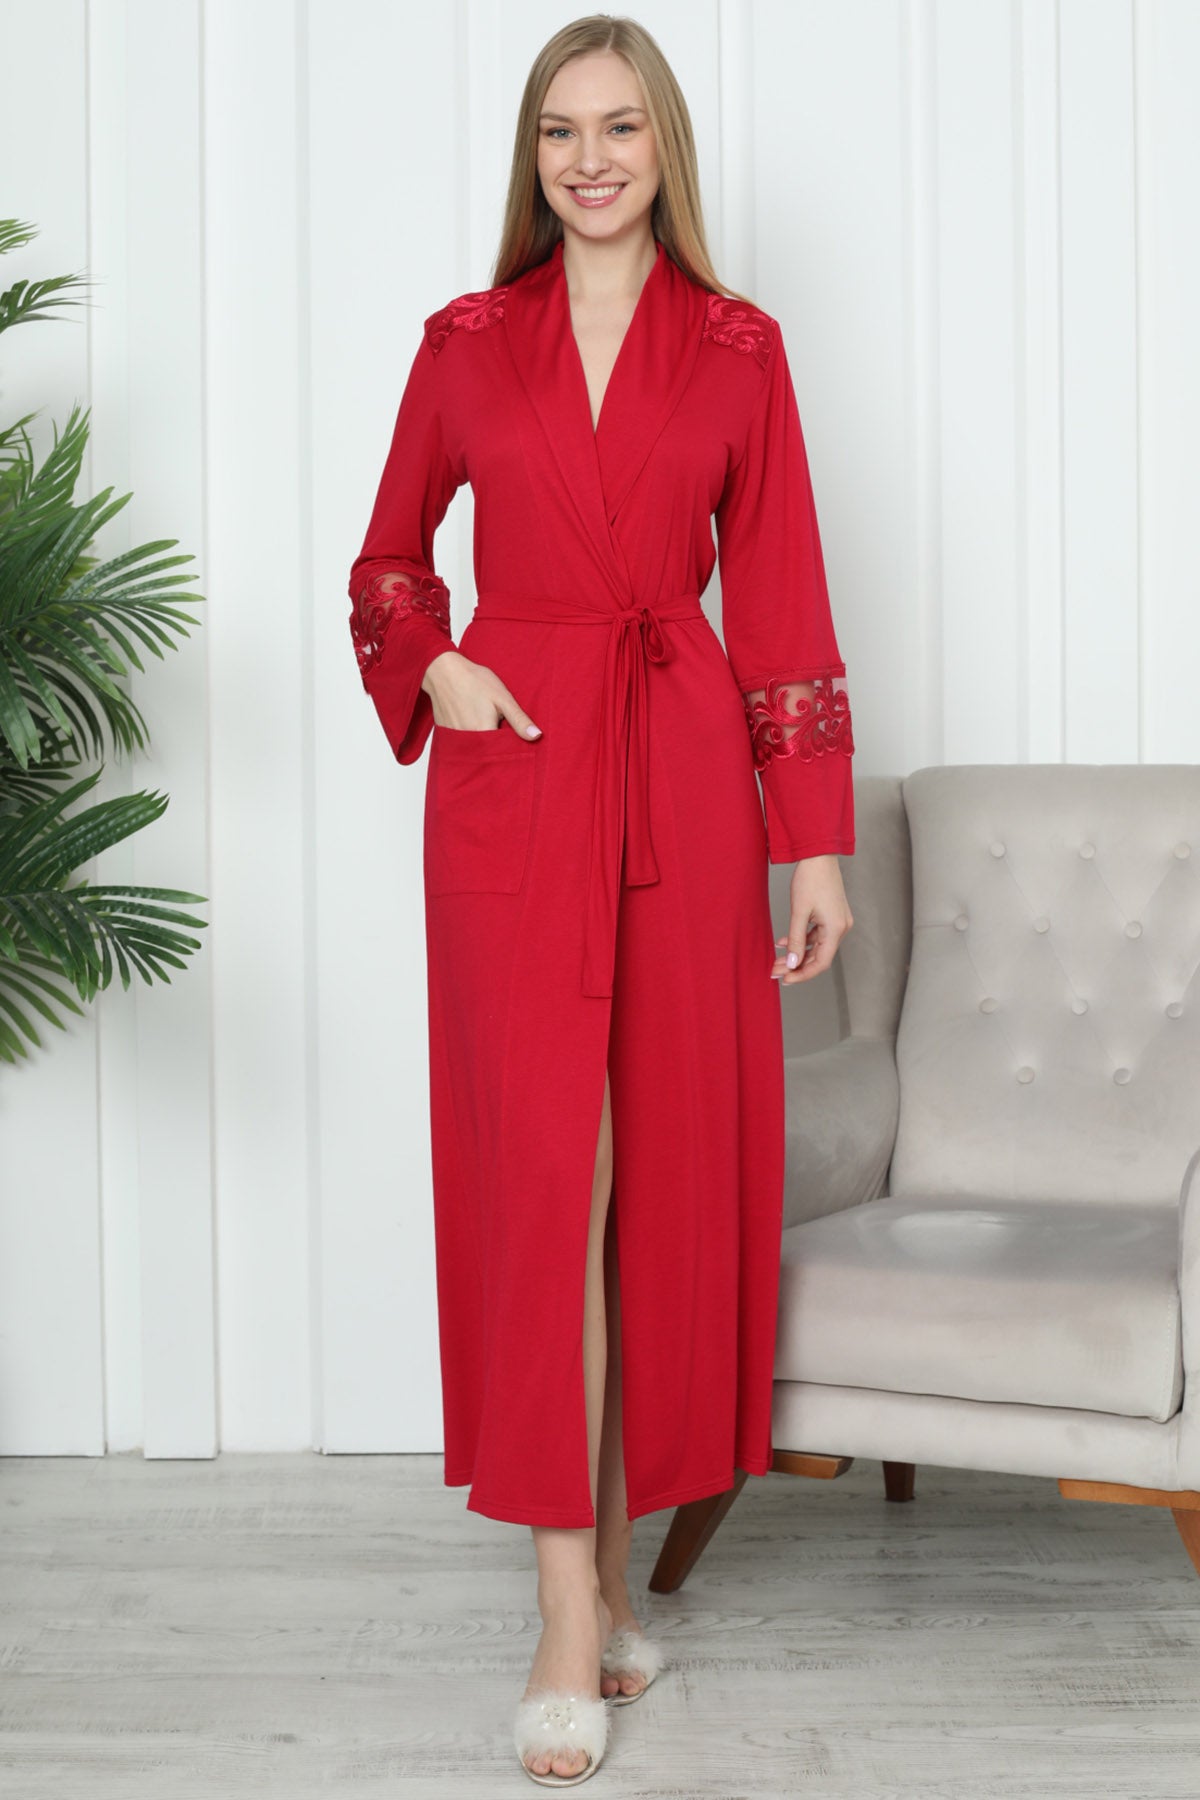 Shopymommy 0817 Lace Sleeve Maternity Robe Red